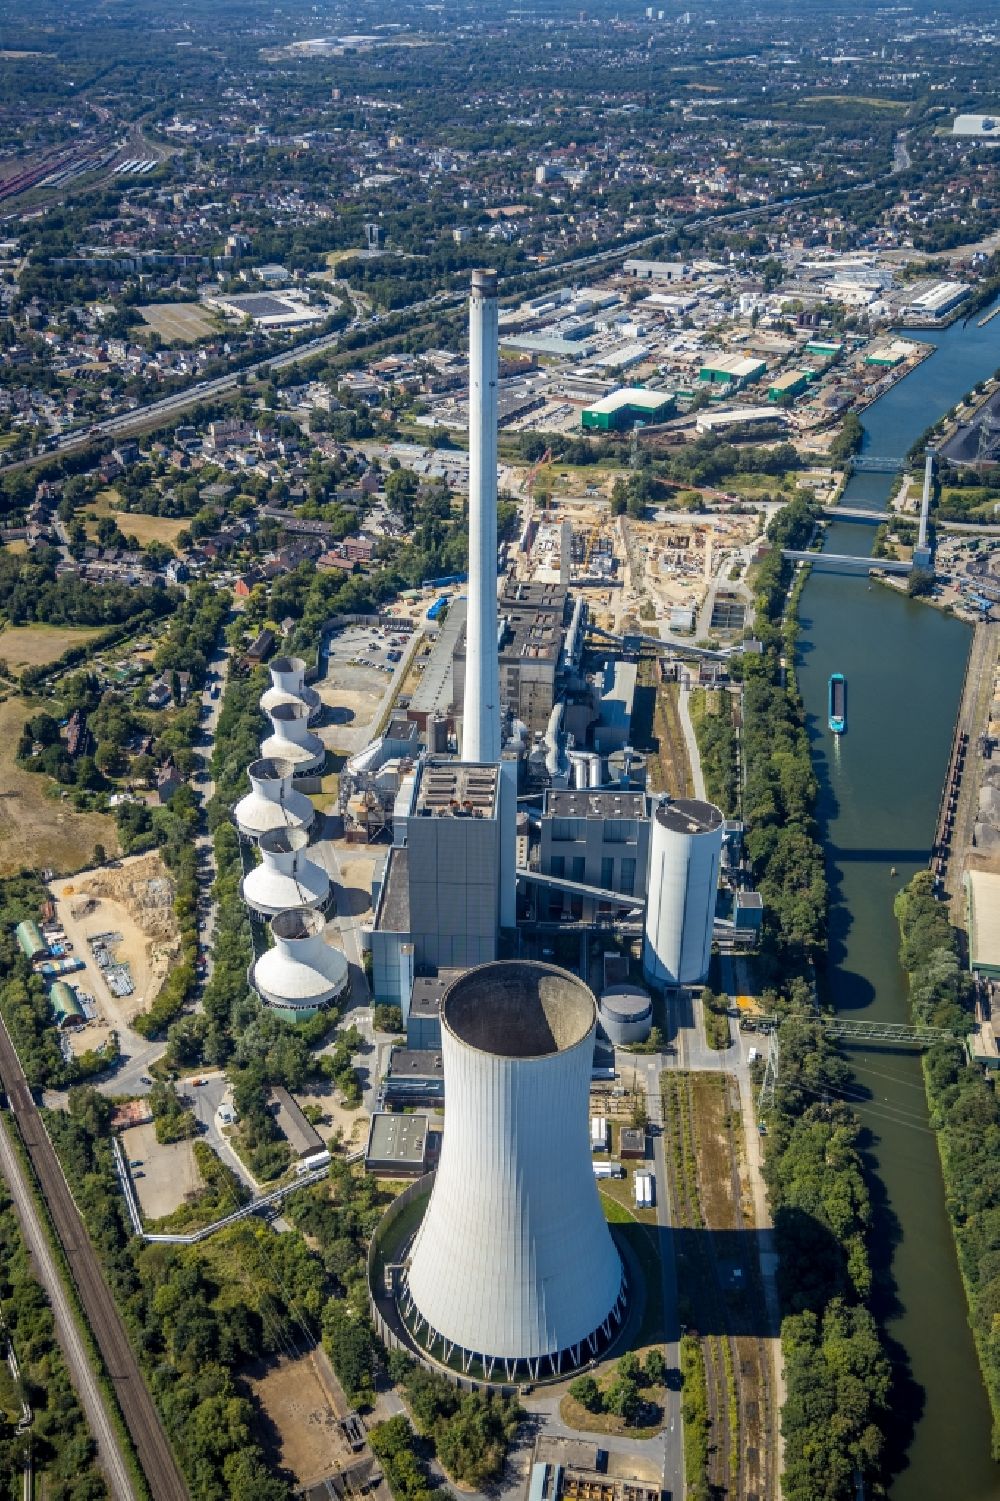 Aerial photograph Herne - Steag CHP group power plant overlooking the construction site for the new building of the GuD-Kraftwerk by the Projektgesellschaft GuD Herne GmbH on the Rhine-Herne Canal Herne in the state of North Rhine-Westphalia